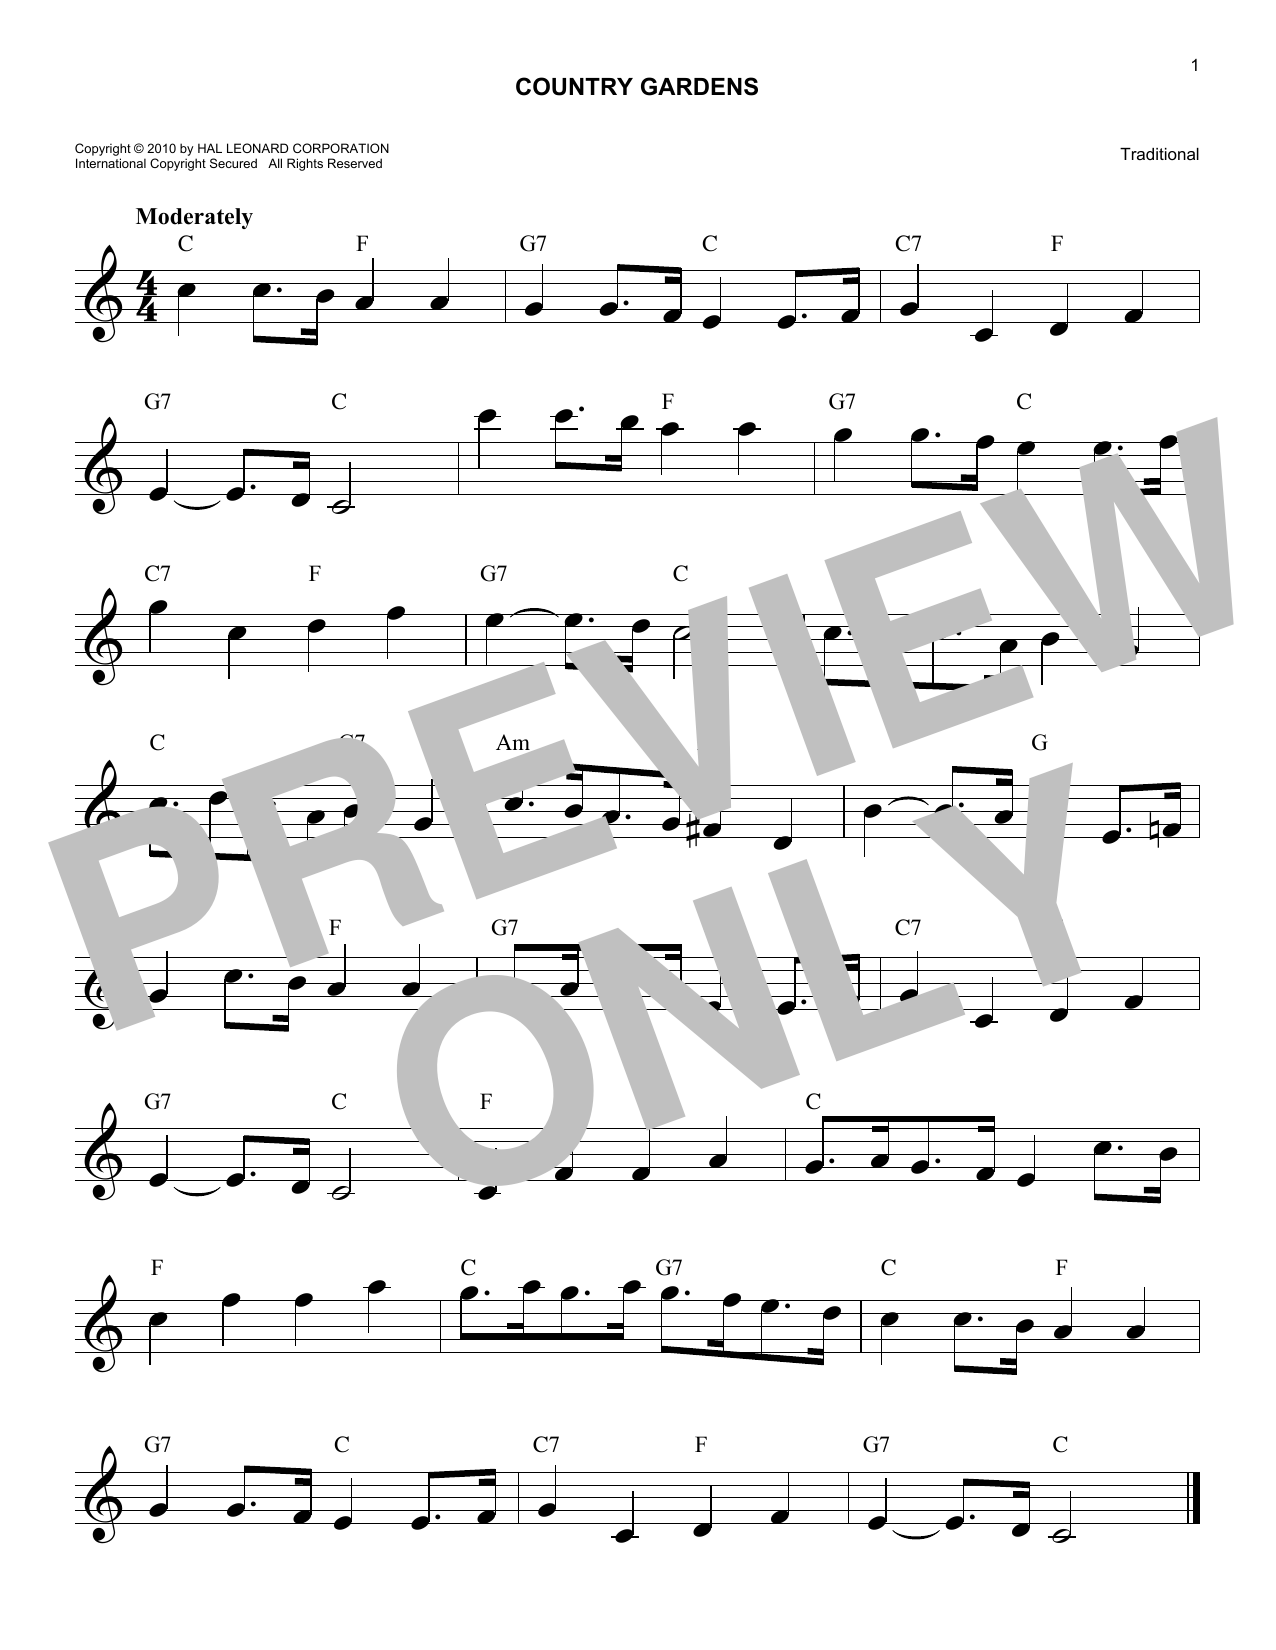 Download Traditional Country Gardens Sheet Music